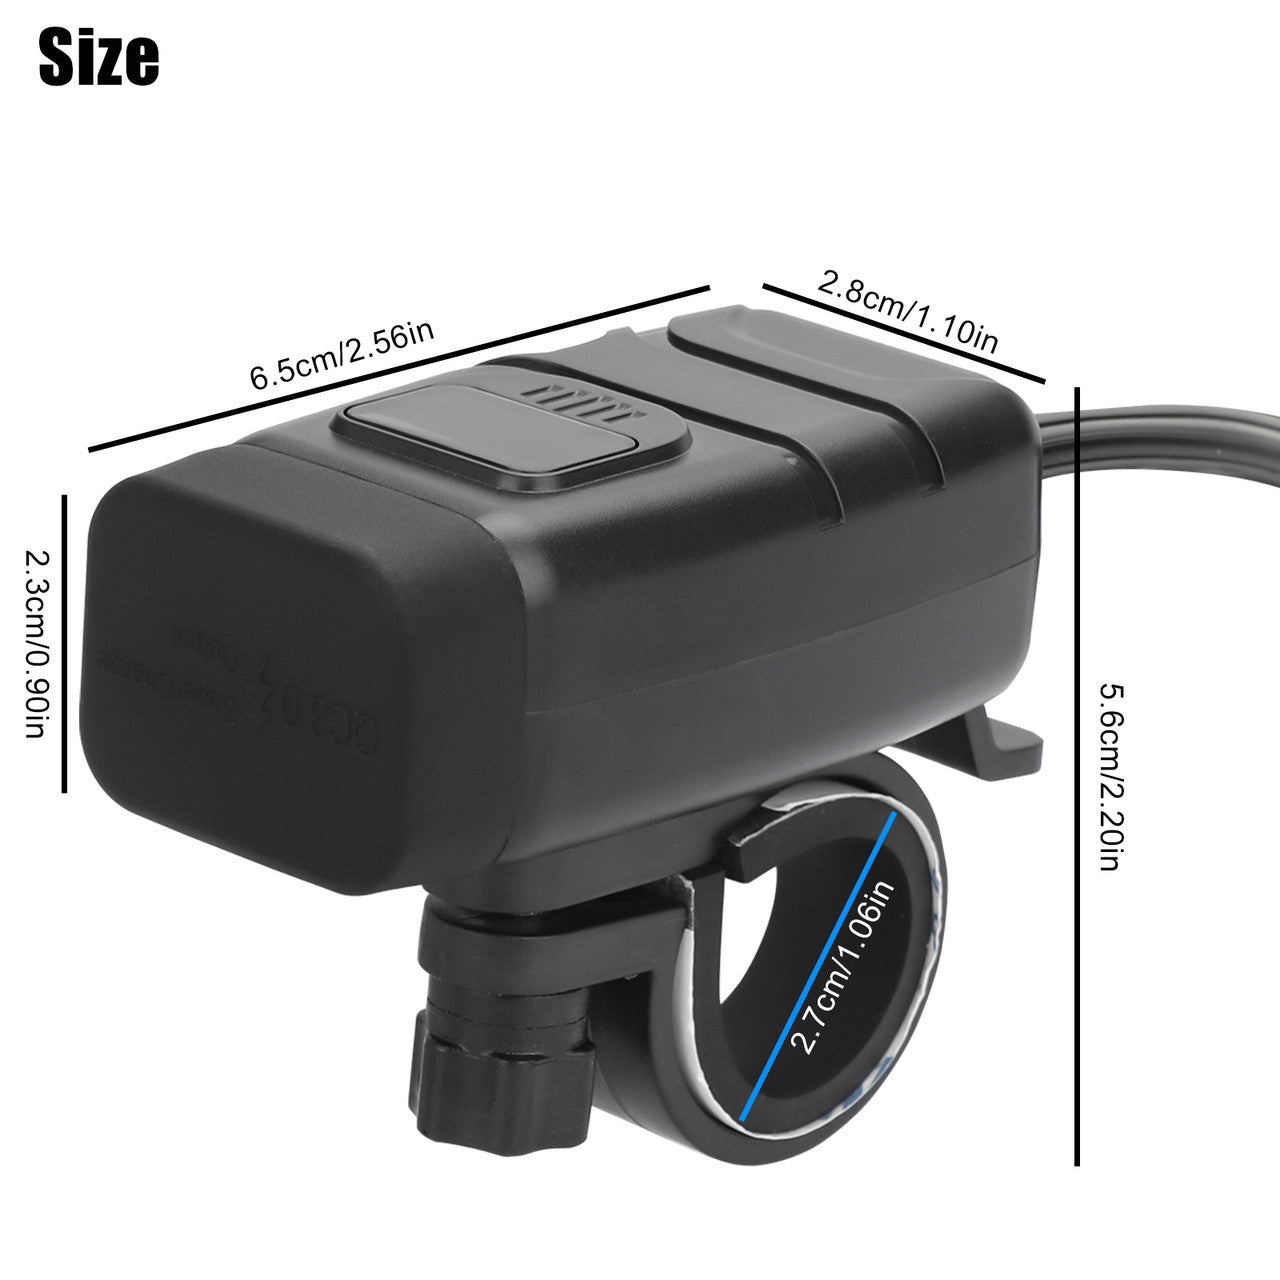 Motorcycle Phone Charger USB -  Waterproof 6.8A Dual Port QC3.0 Fast Charging, Quick Disconnect Sae USB Adapter,Voltmeter,On/Off Switch&Fuse